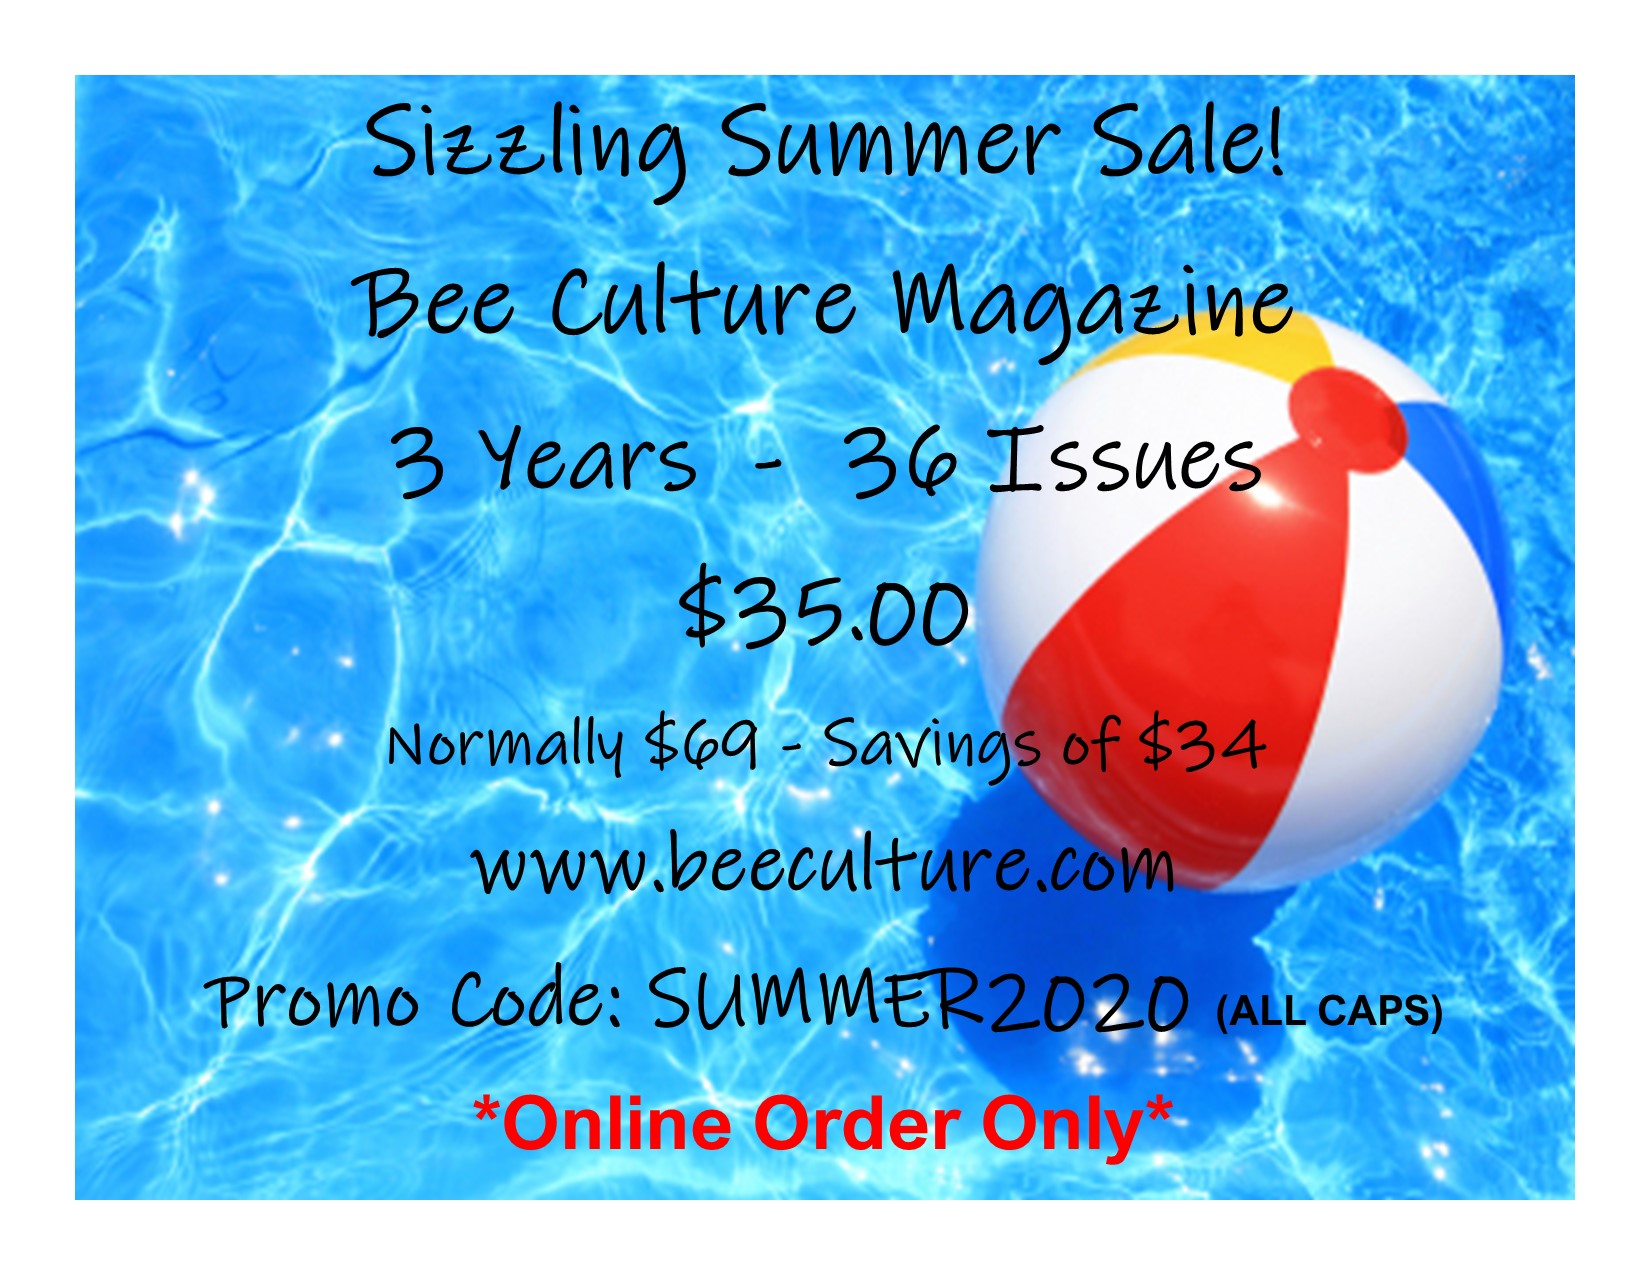 CATCH THE BUZZ – Sizzling Summer Subscription Special